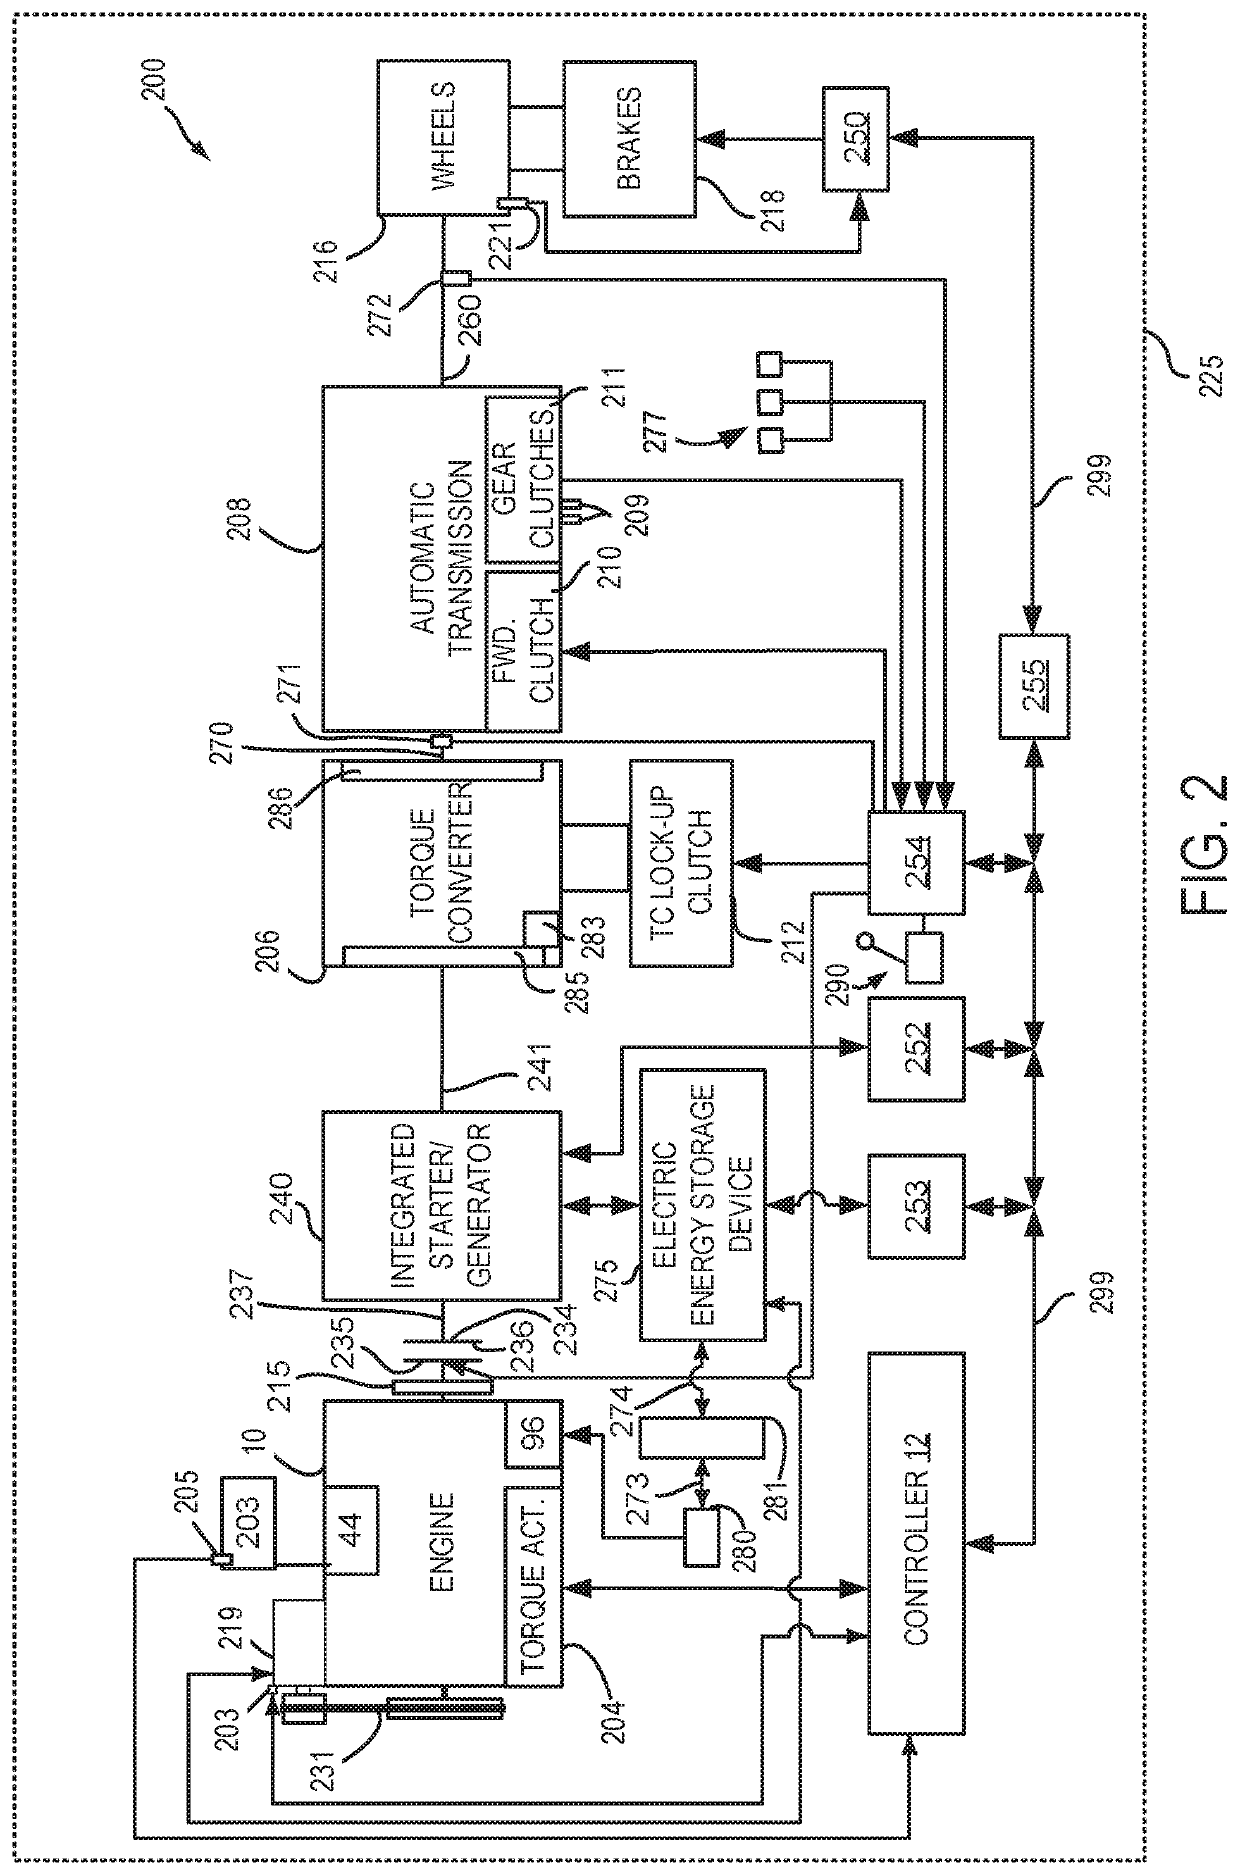 Methods and system for automatically stopping an engine